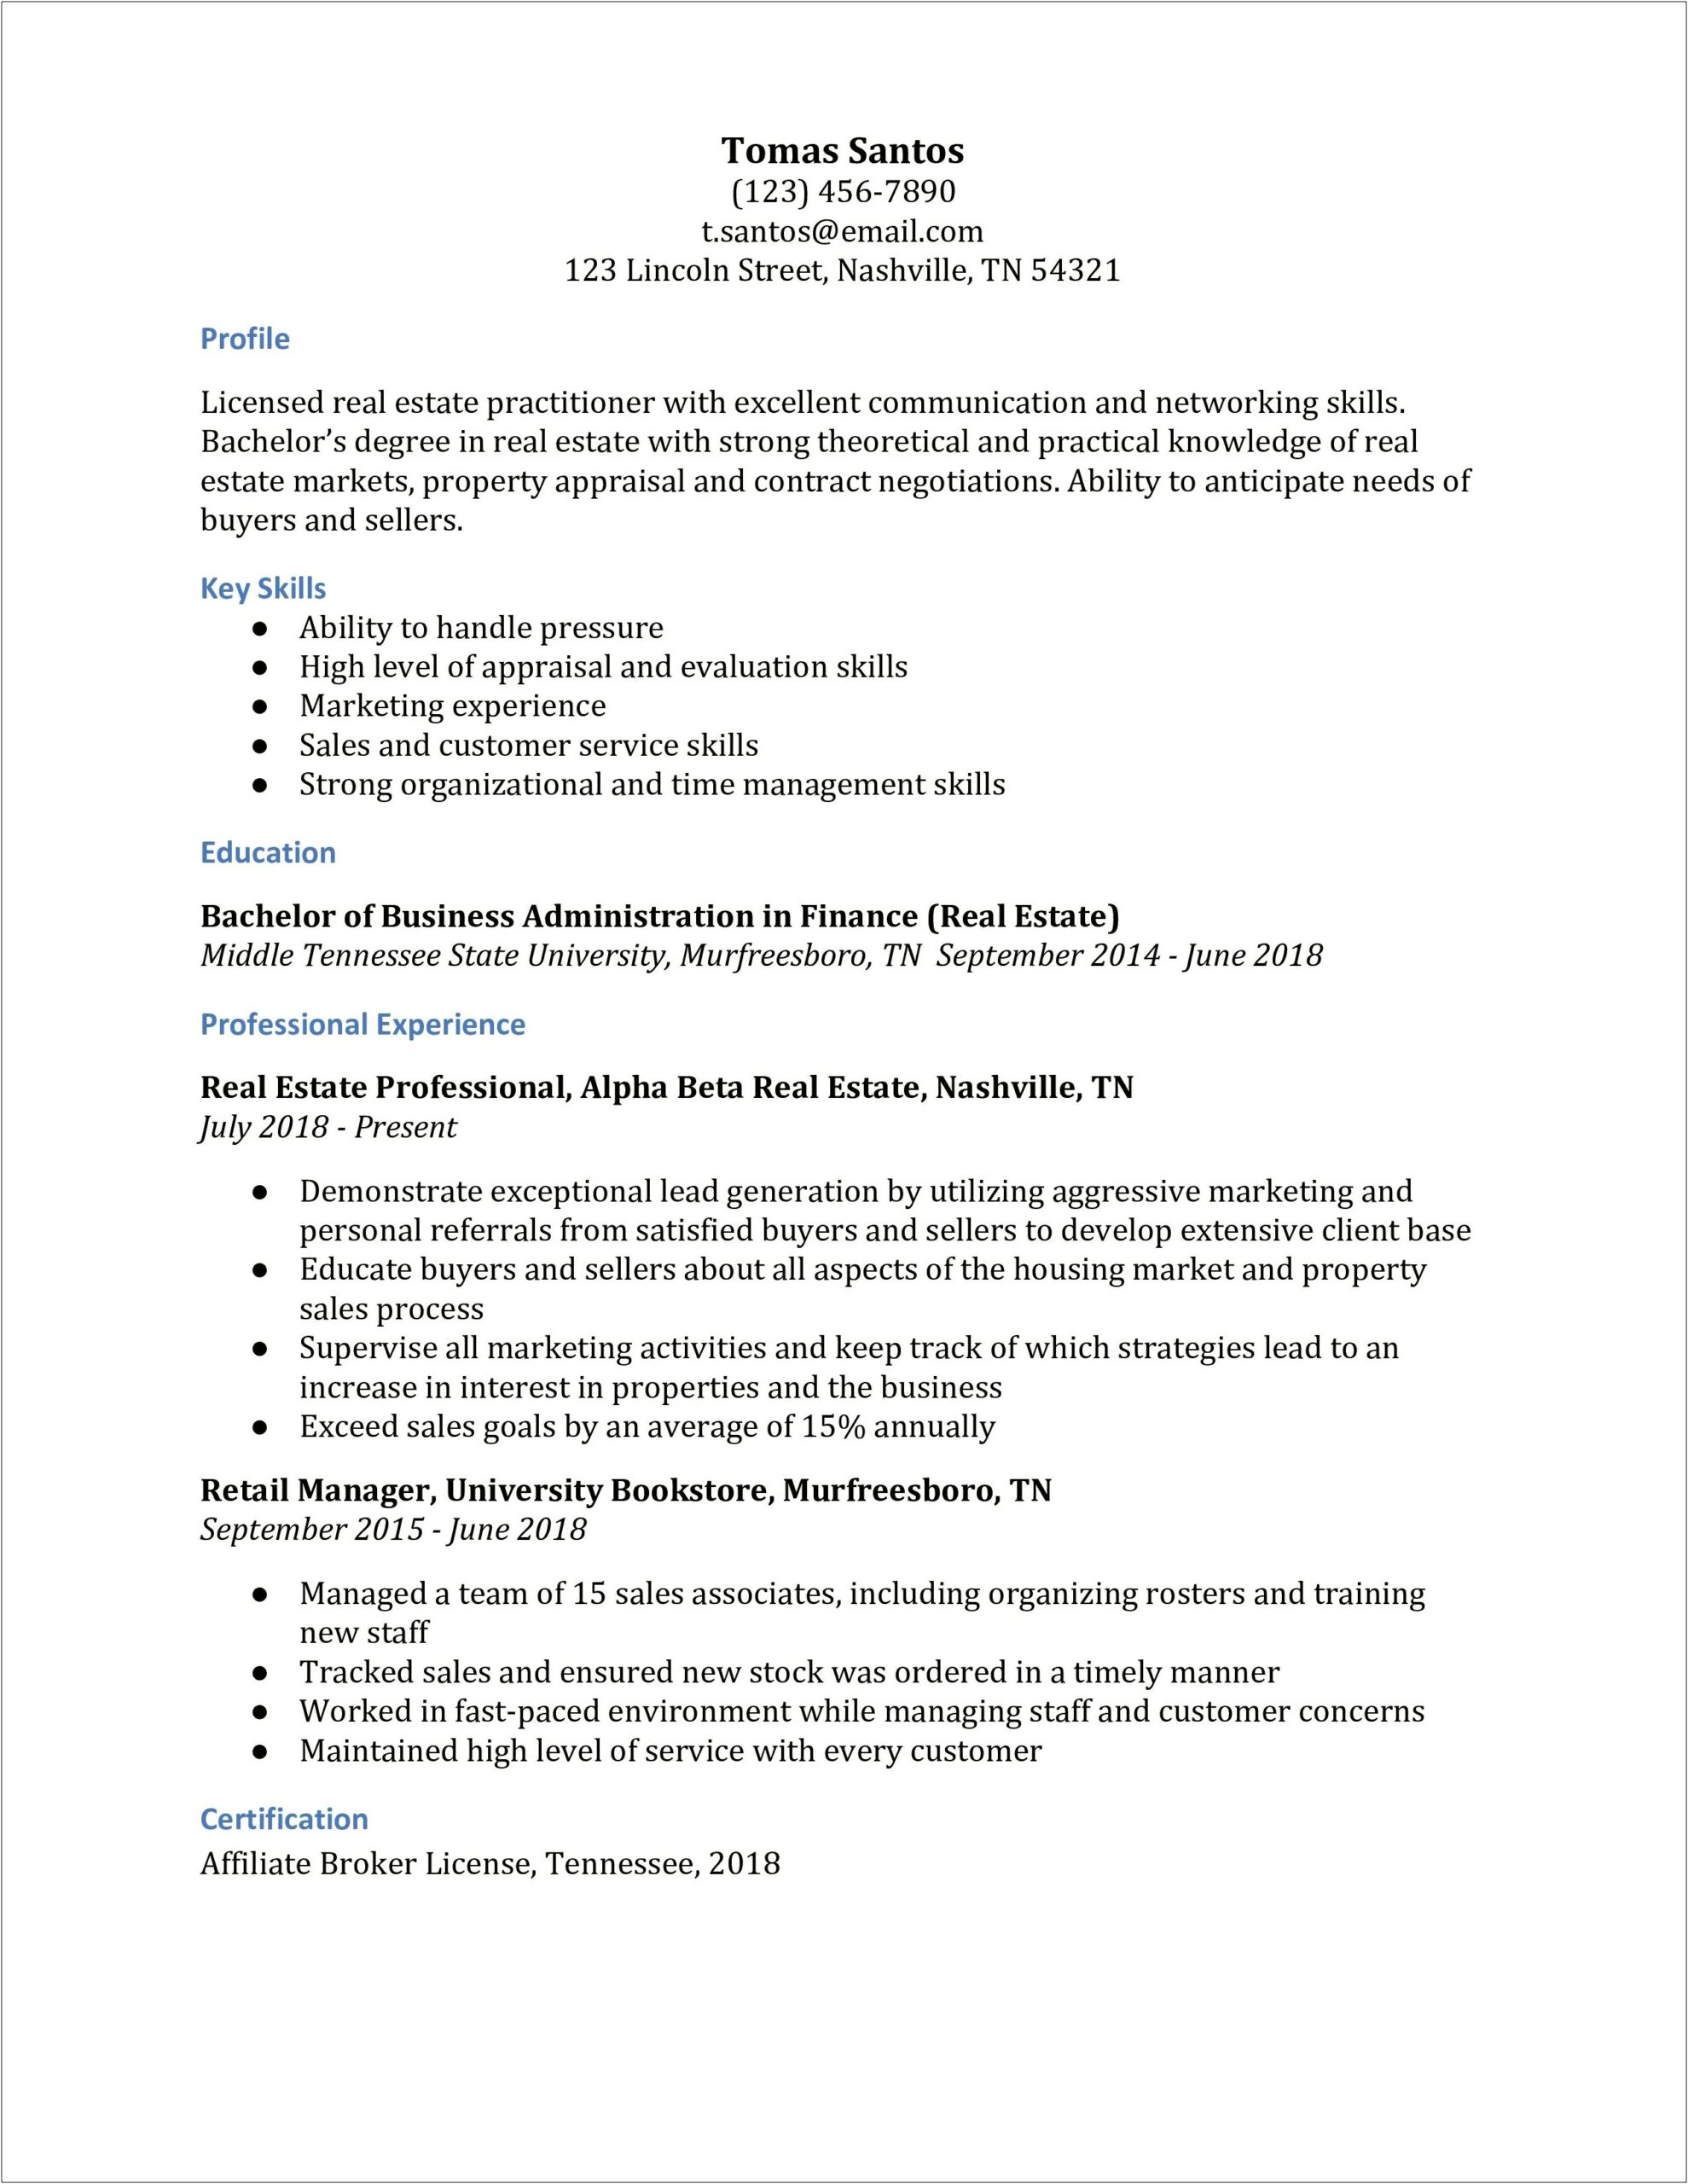 Resume Examples 2018 Real Estate Sales